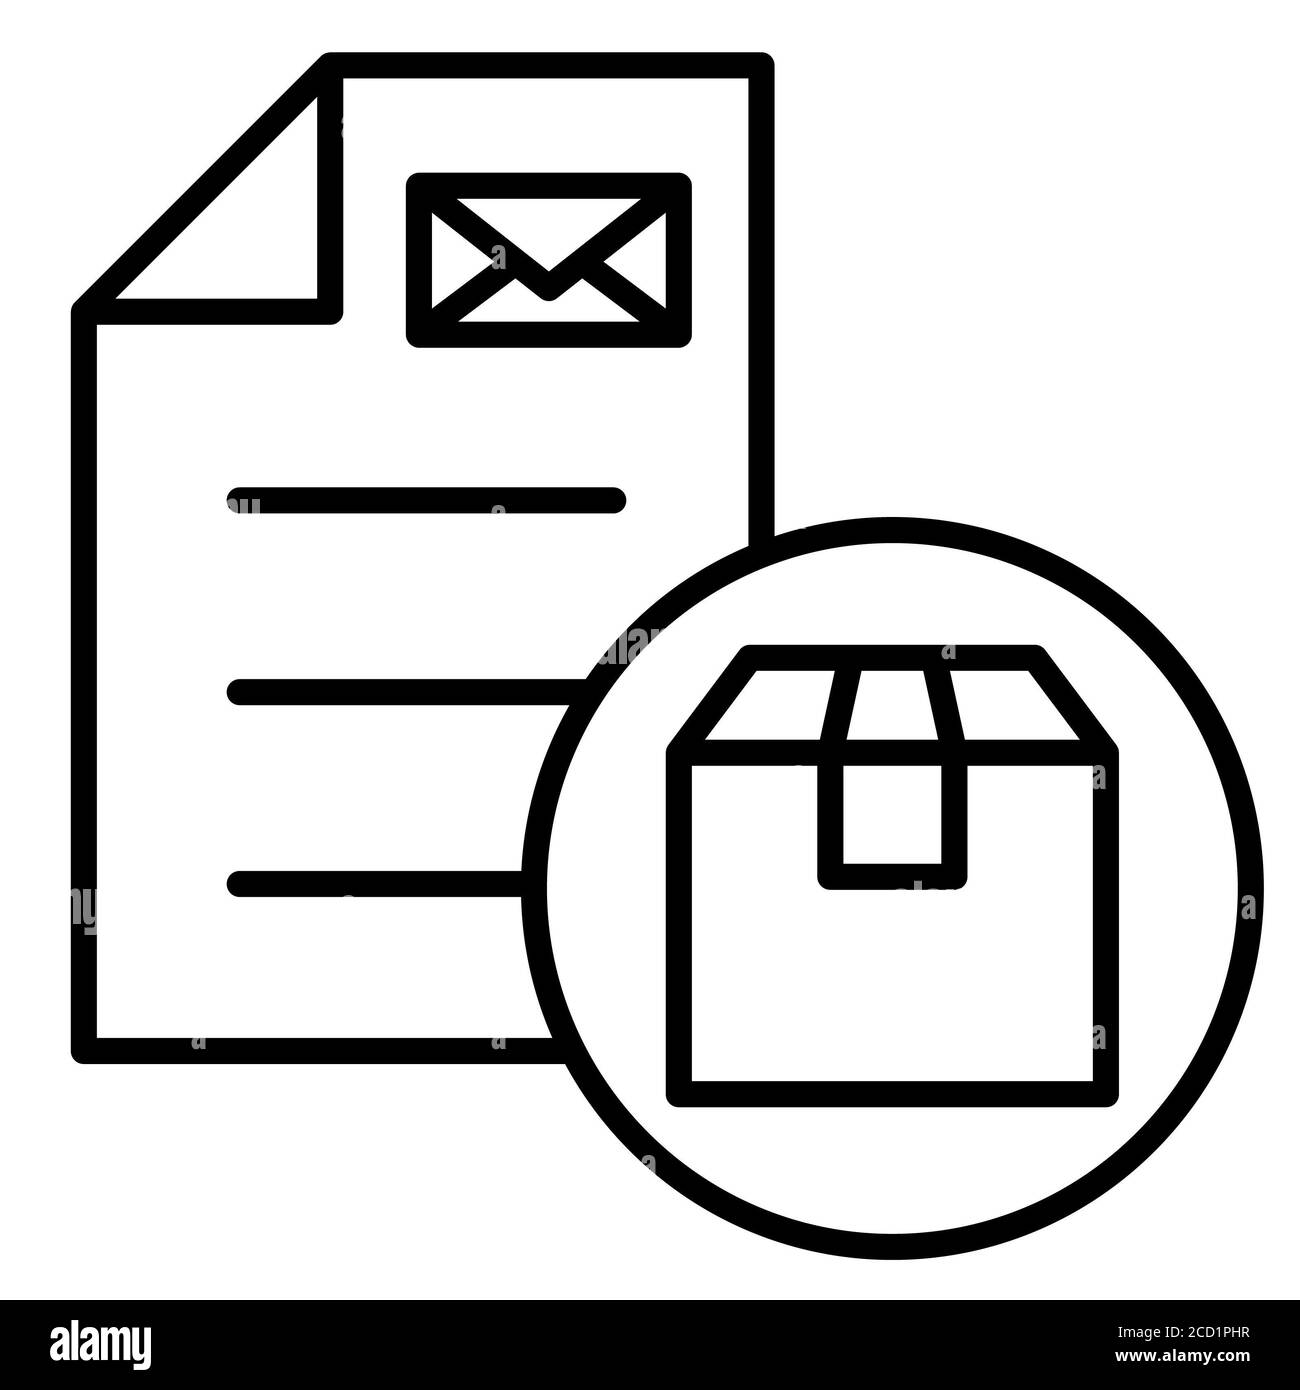 Document Delivery Service Line Icons Stock Photo